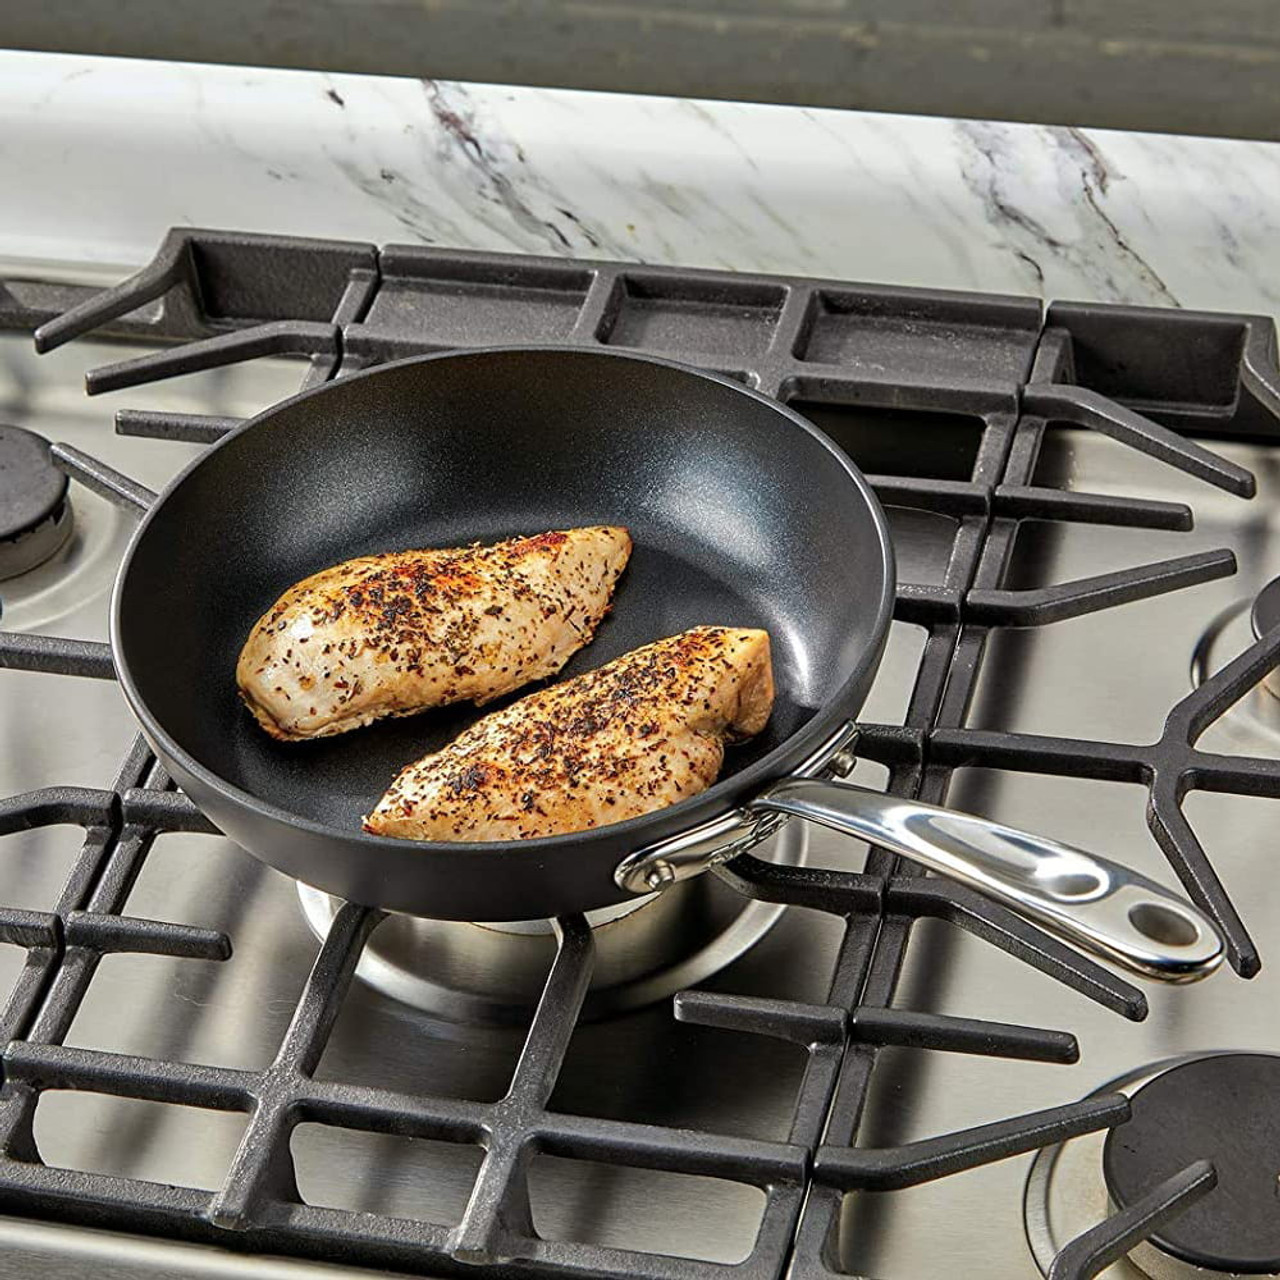 https://cdn11.bigcommerce.com/s-hccytny0od/images/stencil/1280x1280/products/3568/12739/all-clad-essentials-nonstick-2pc-fry-pan-set-1__30937.1601382930.jpg?c=2?imbypass=on